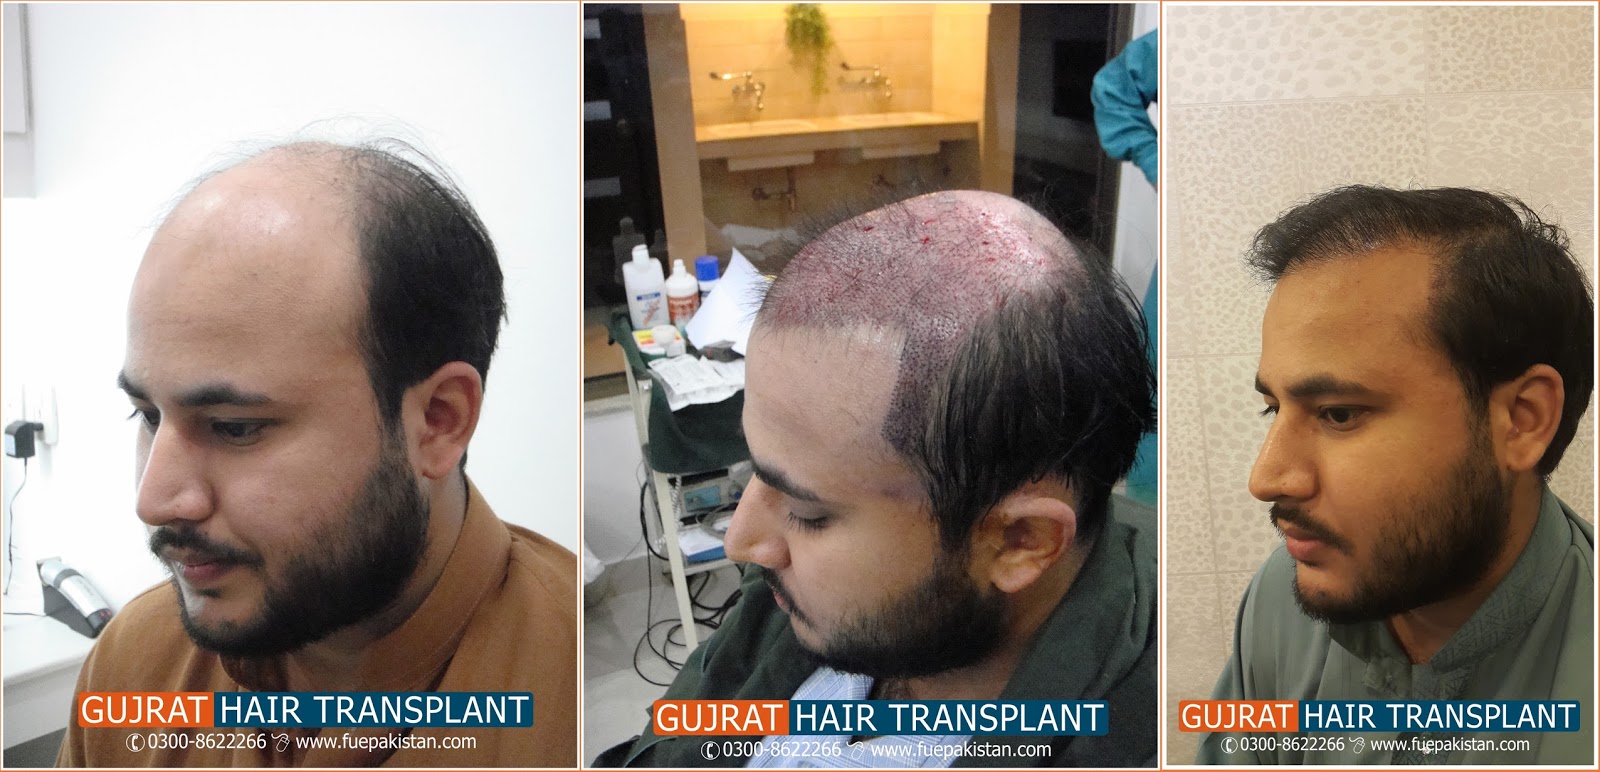 Hair Transplant in Pakistan,FUE in Pakistan: fue hair transplant clinic ...